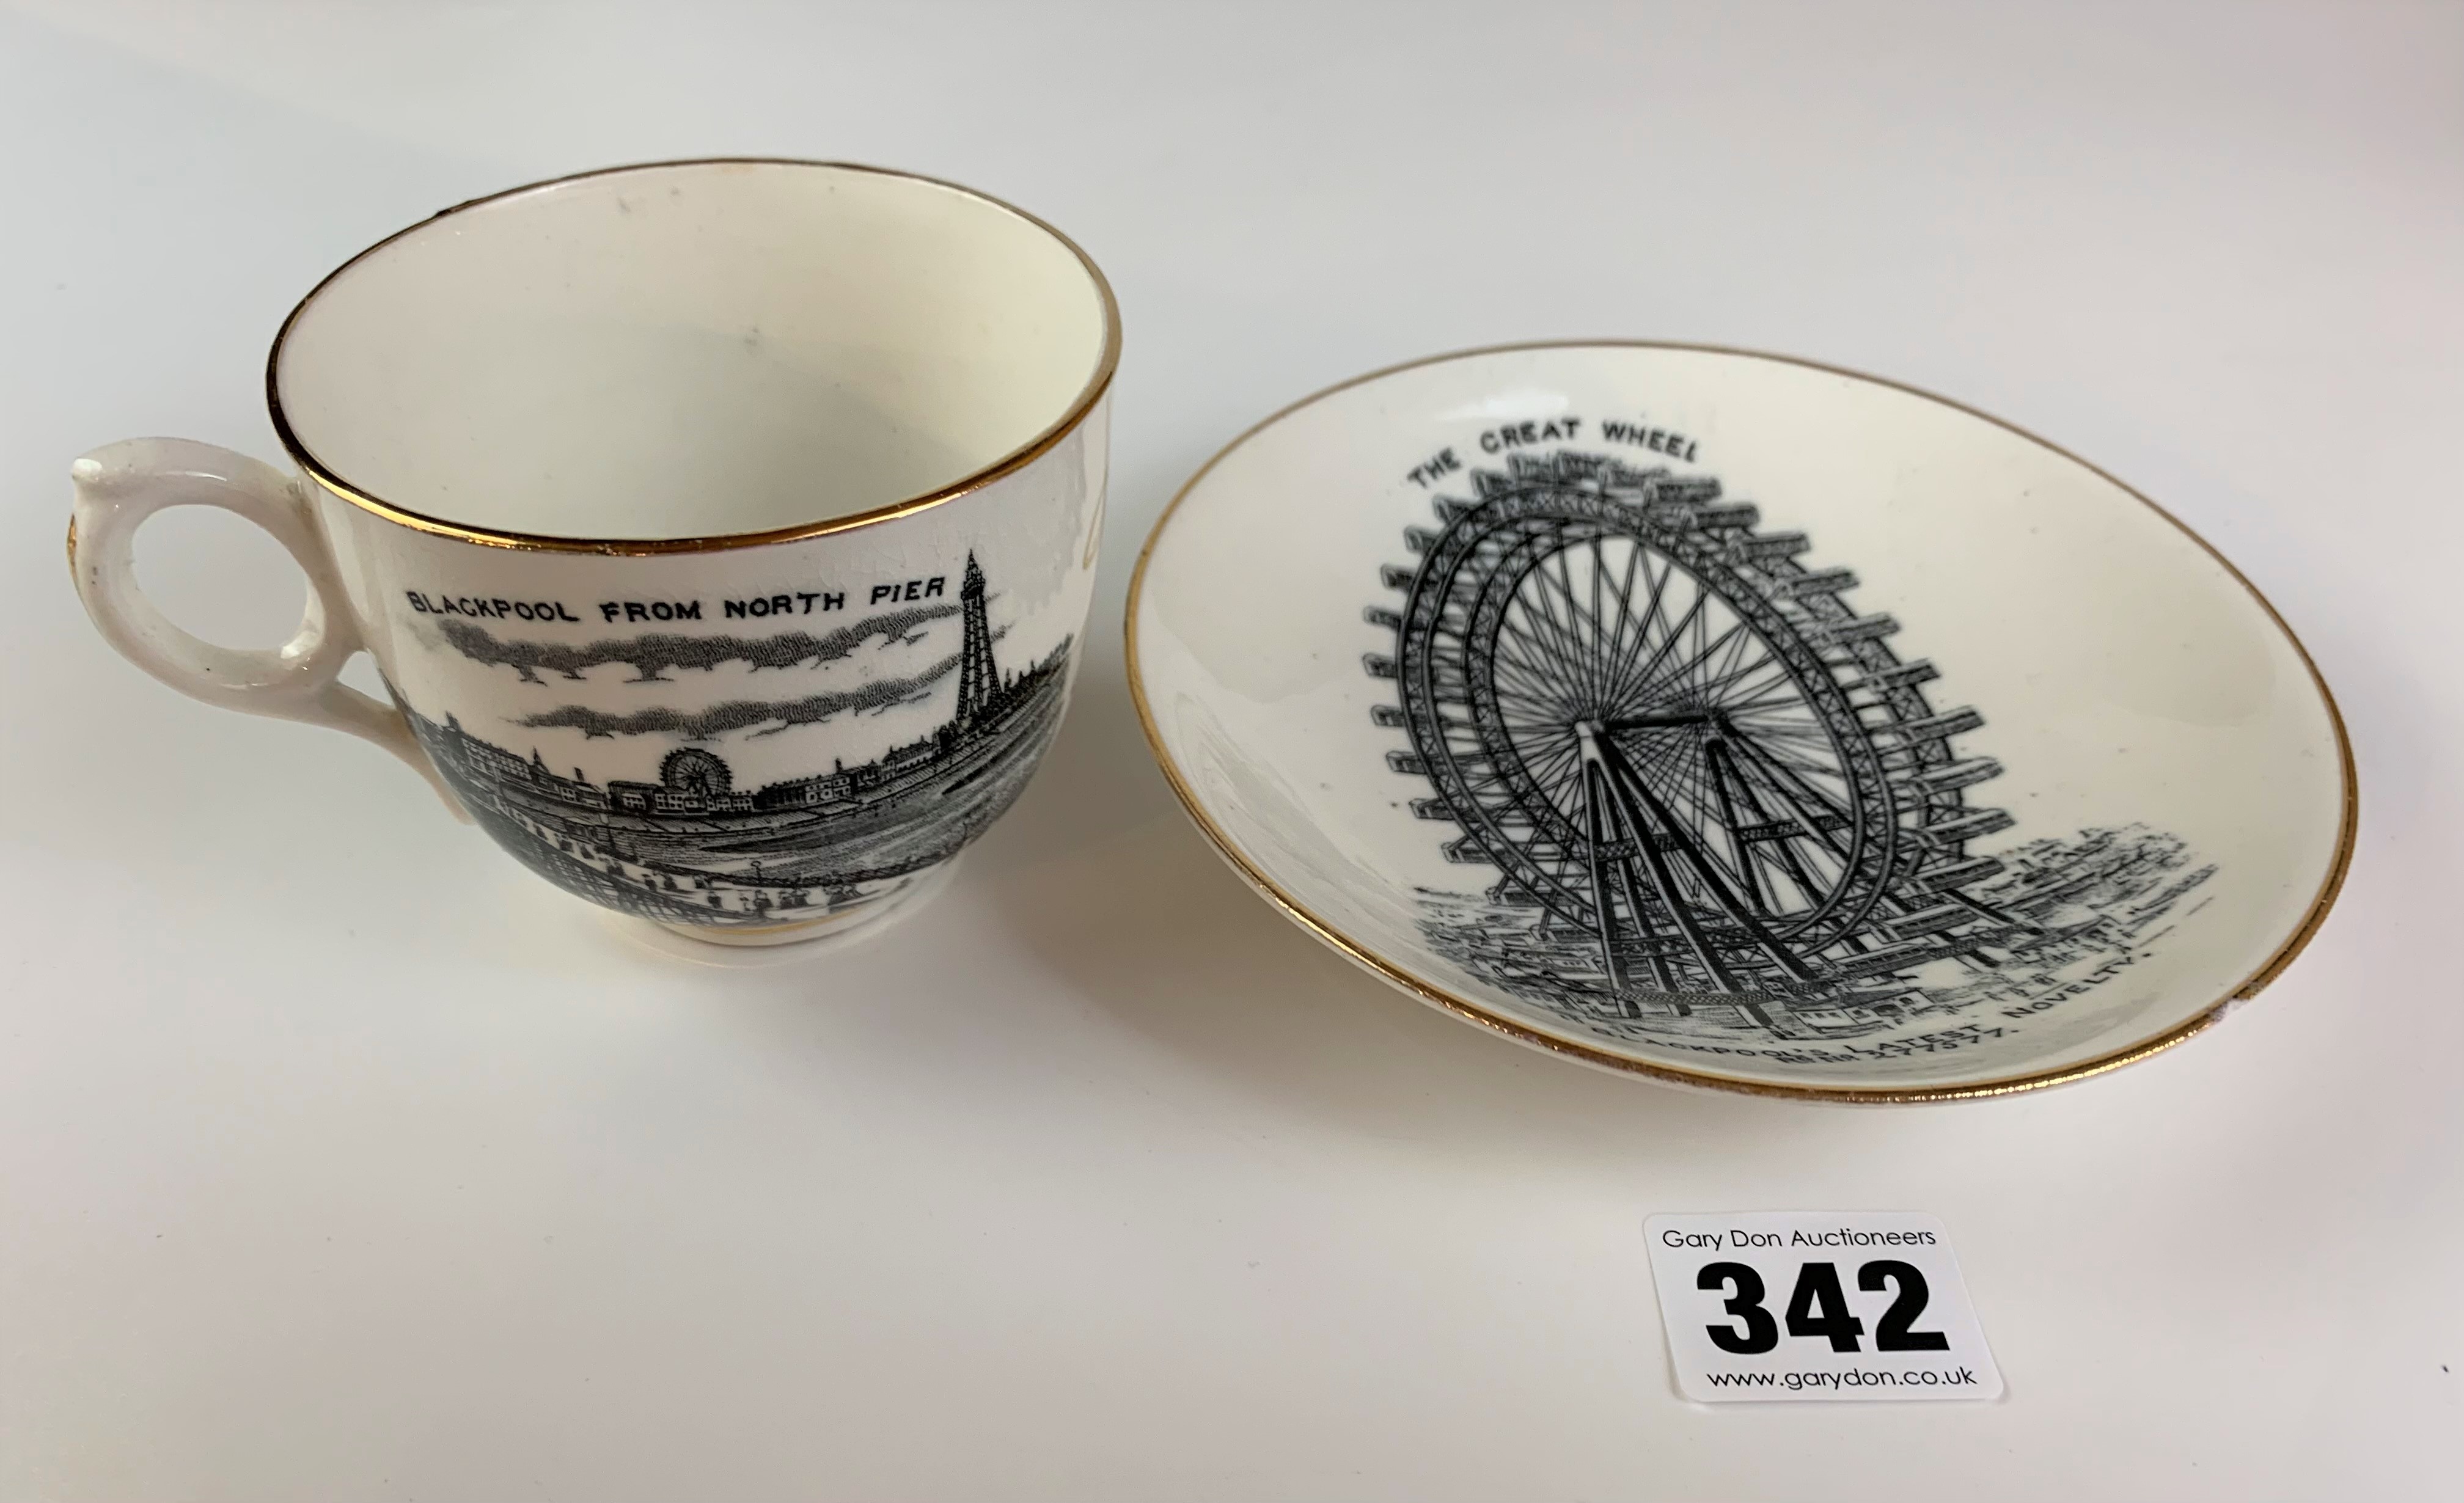 Souvenir from Blackpool cup and saucer ‘ A present for my brother’ with scenes of The Great Wheel, - Image 3 of 4